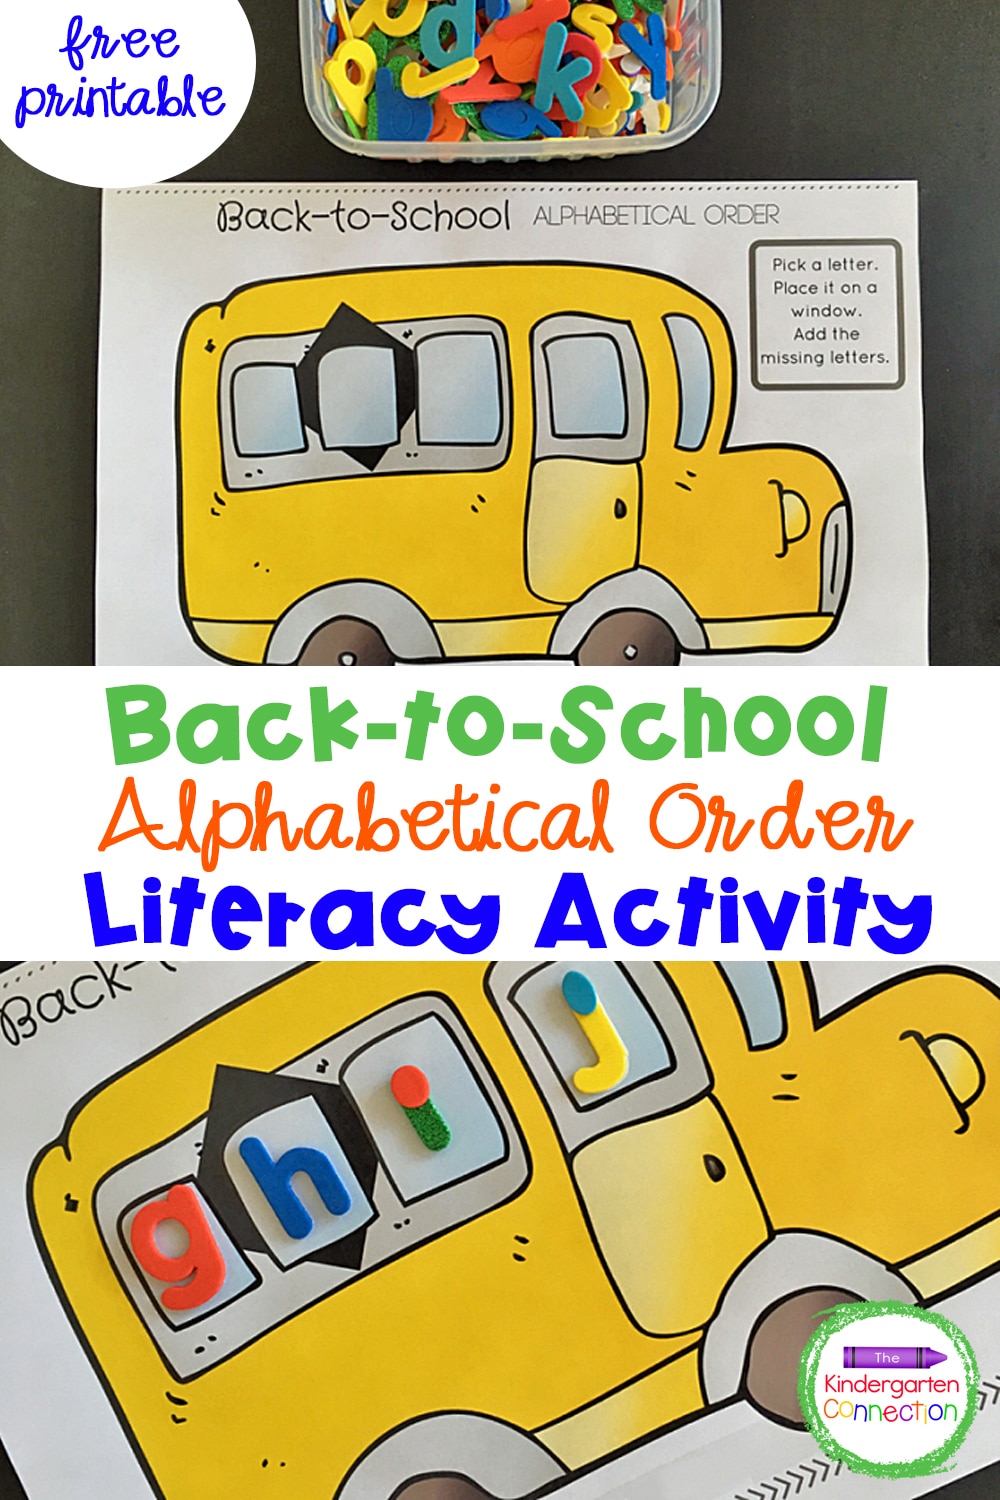 Back-to-School Alphabetical Order Activity, FREE Printable for pre-K and Kindergarten